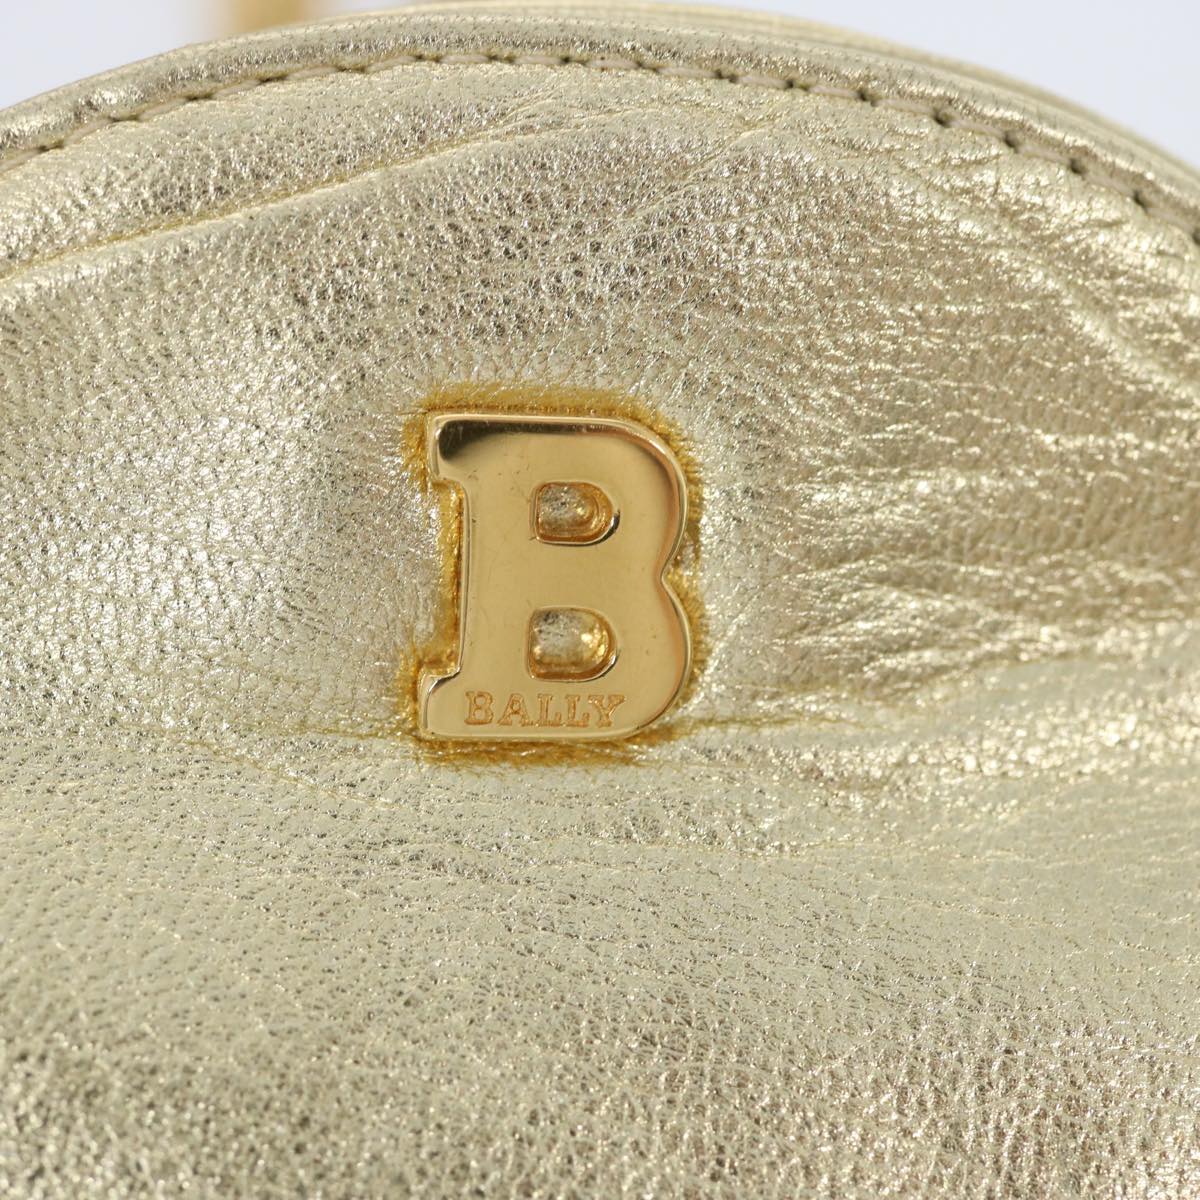 BALLY Chain Shoulder Bag Leather Gold Auth 66874